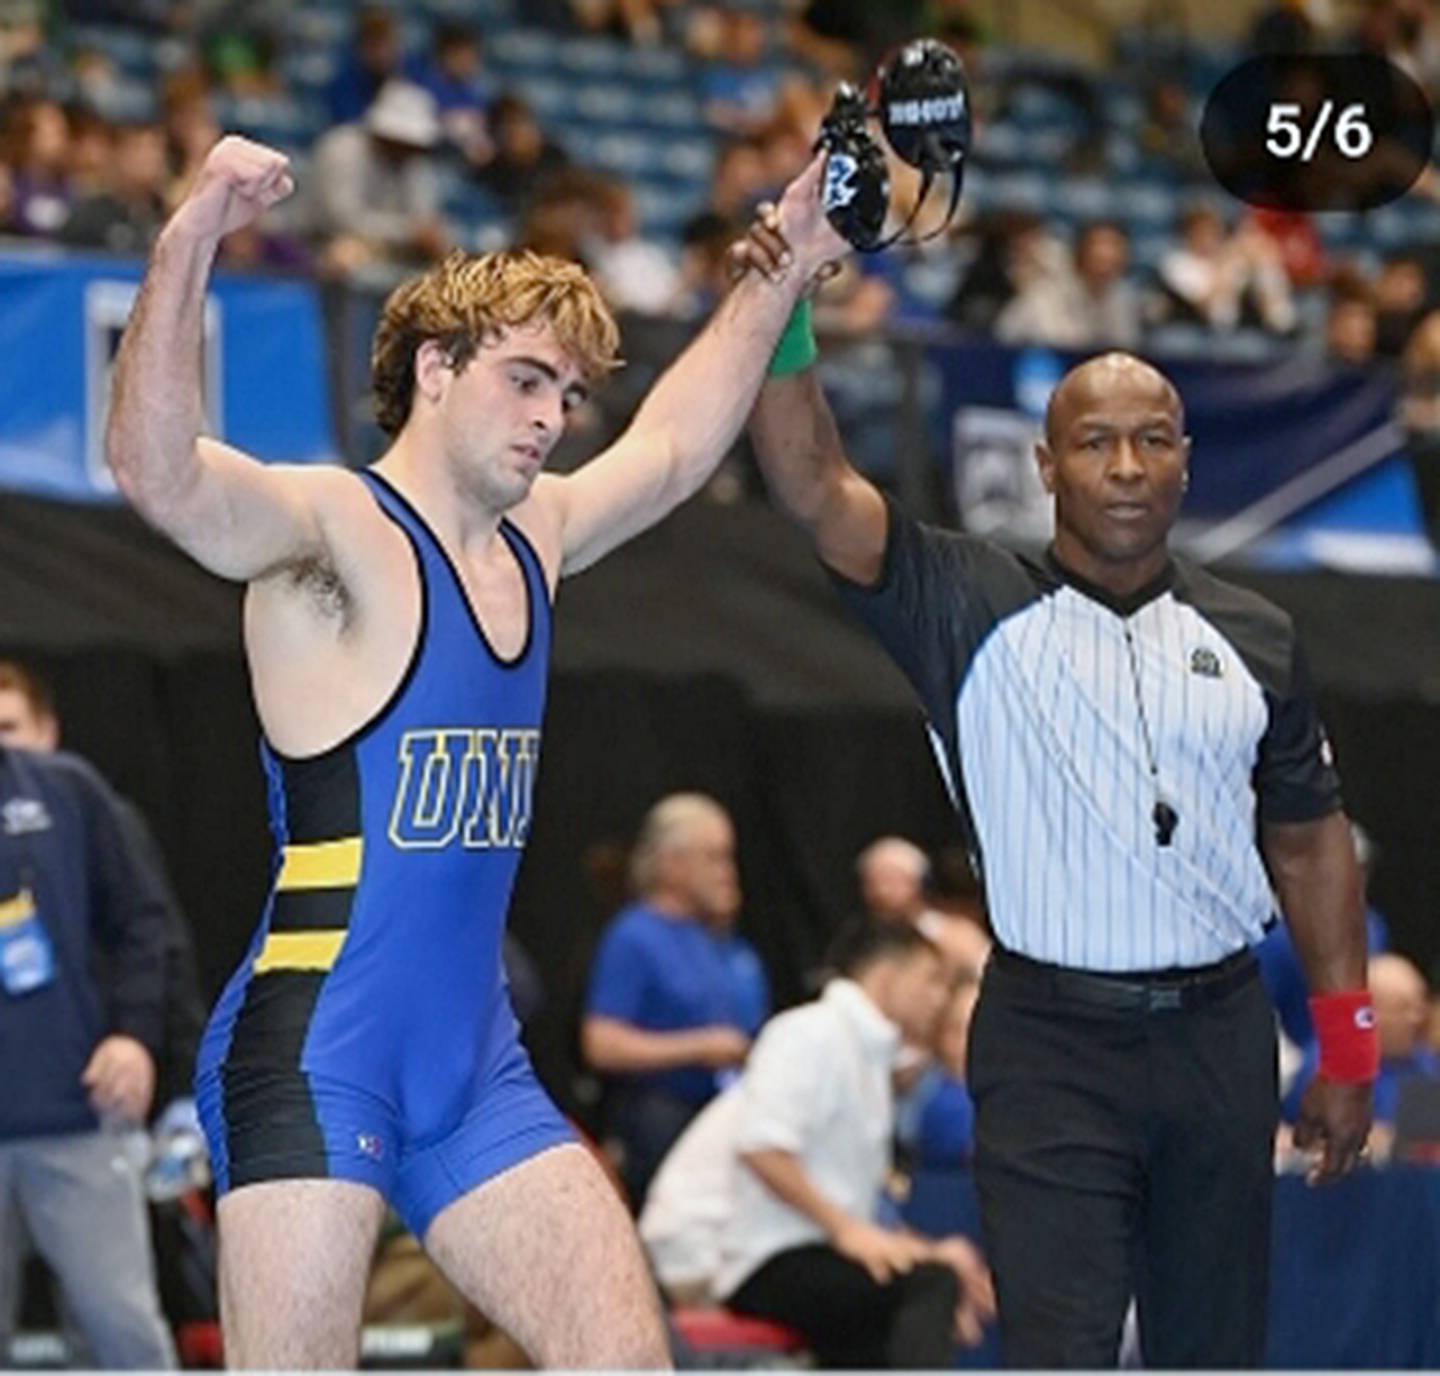 University of Nebraska-Kearney wrestler Jackson Kinsella of Creston raises his arms after the first of his four victories in the NCAA Division II national tournament last weekend in Wichita, Kansas.